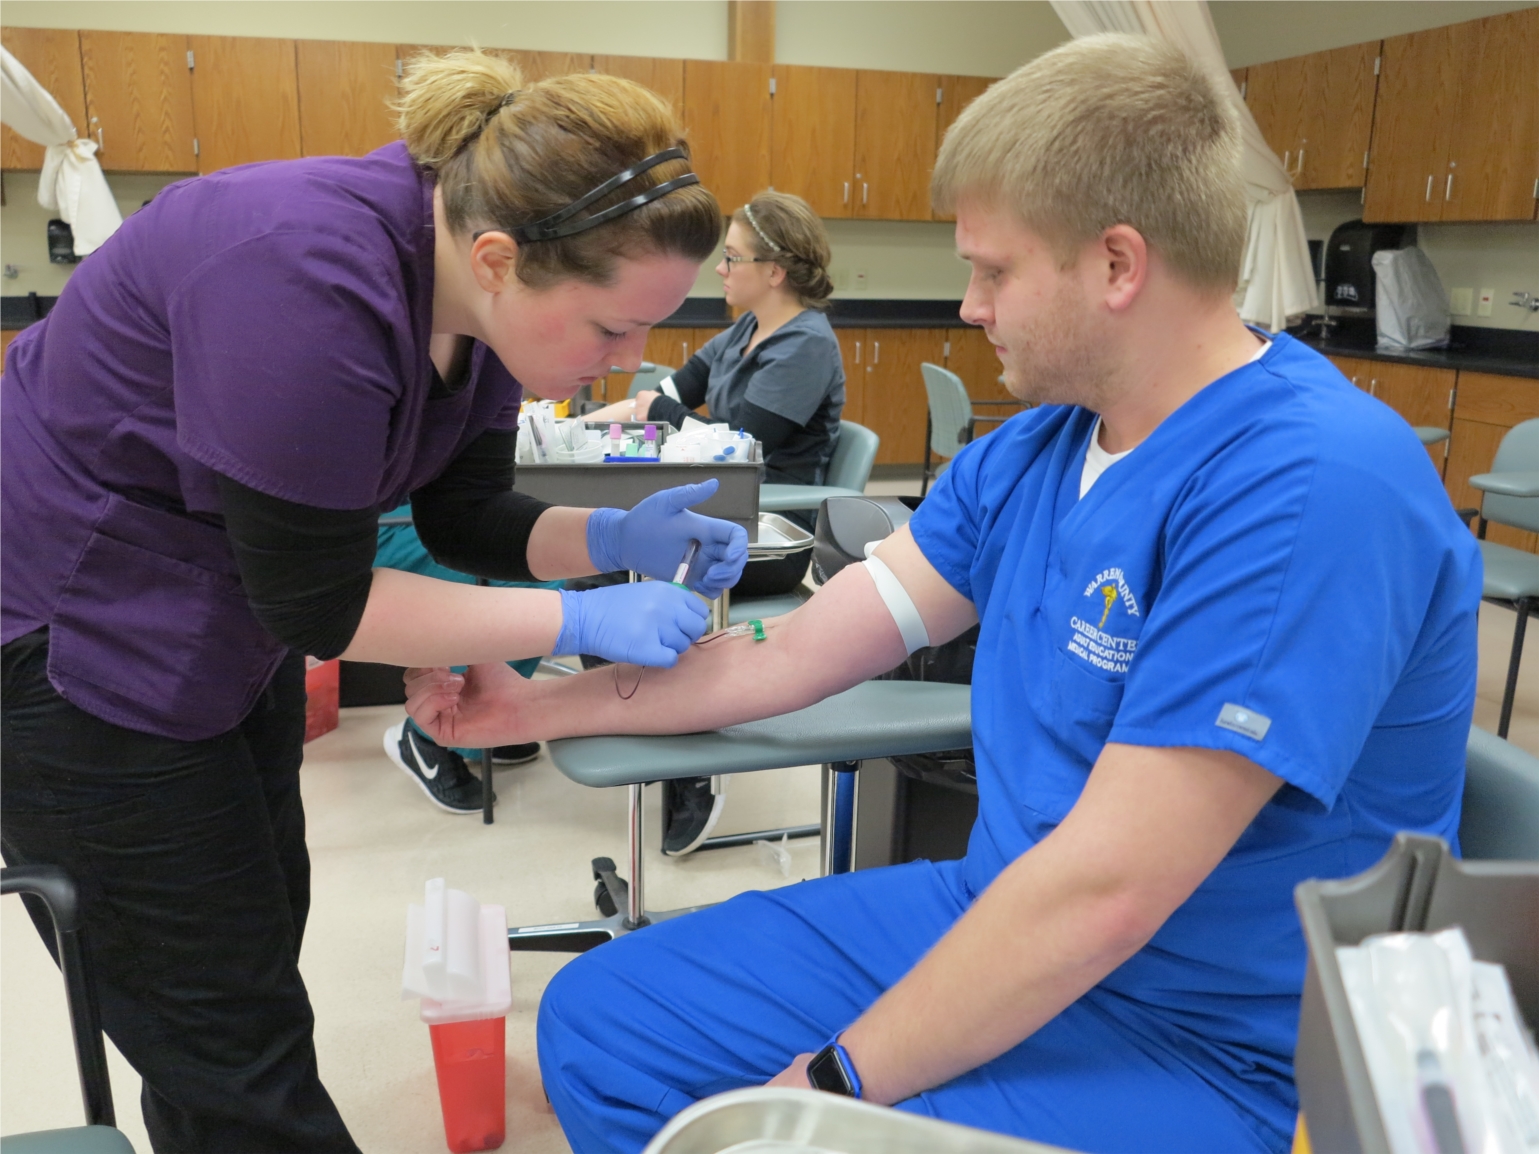 WCCC Adult Education provides training in medical professions such as Phlebotomy